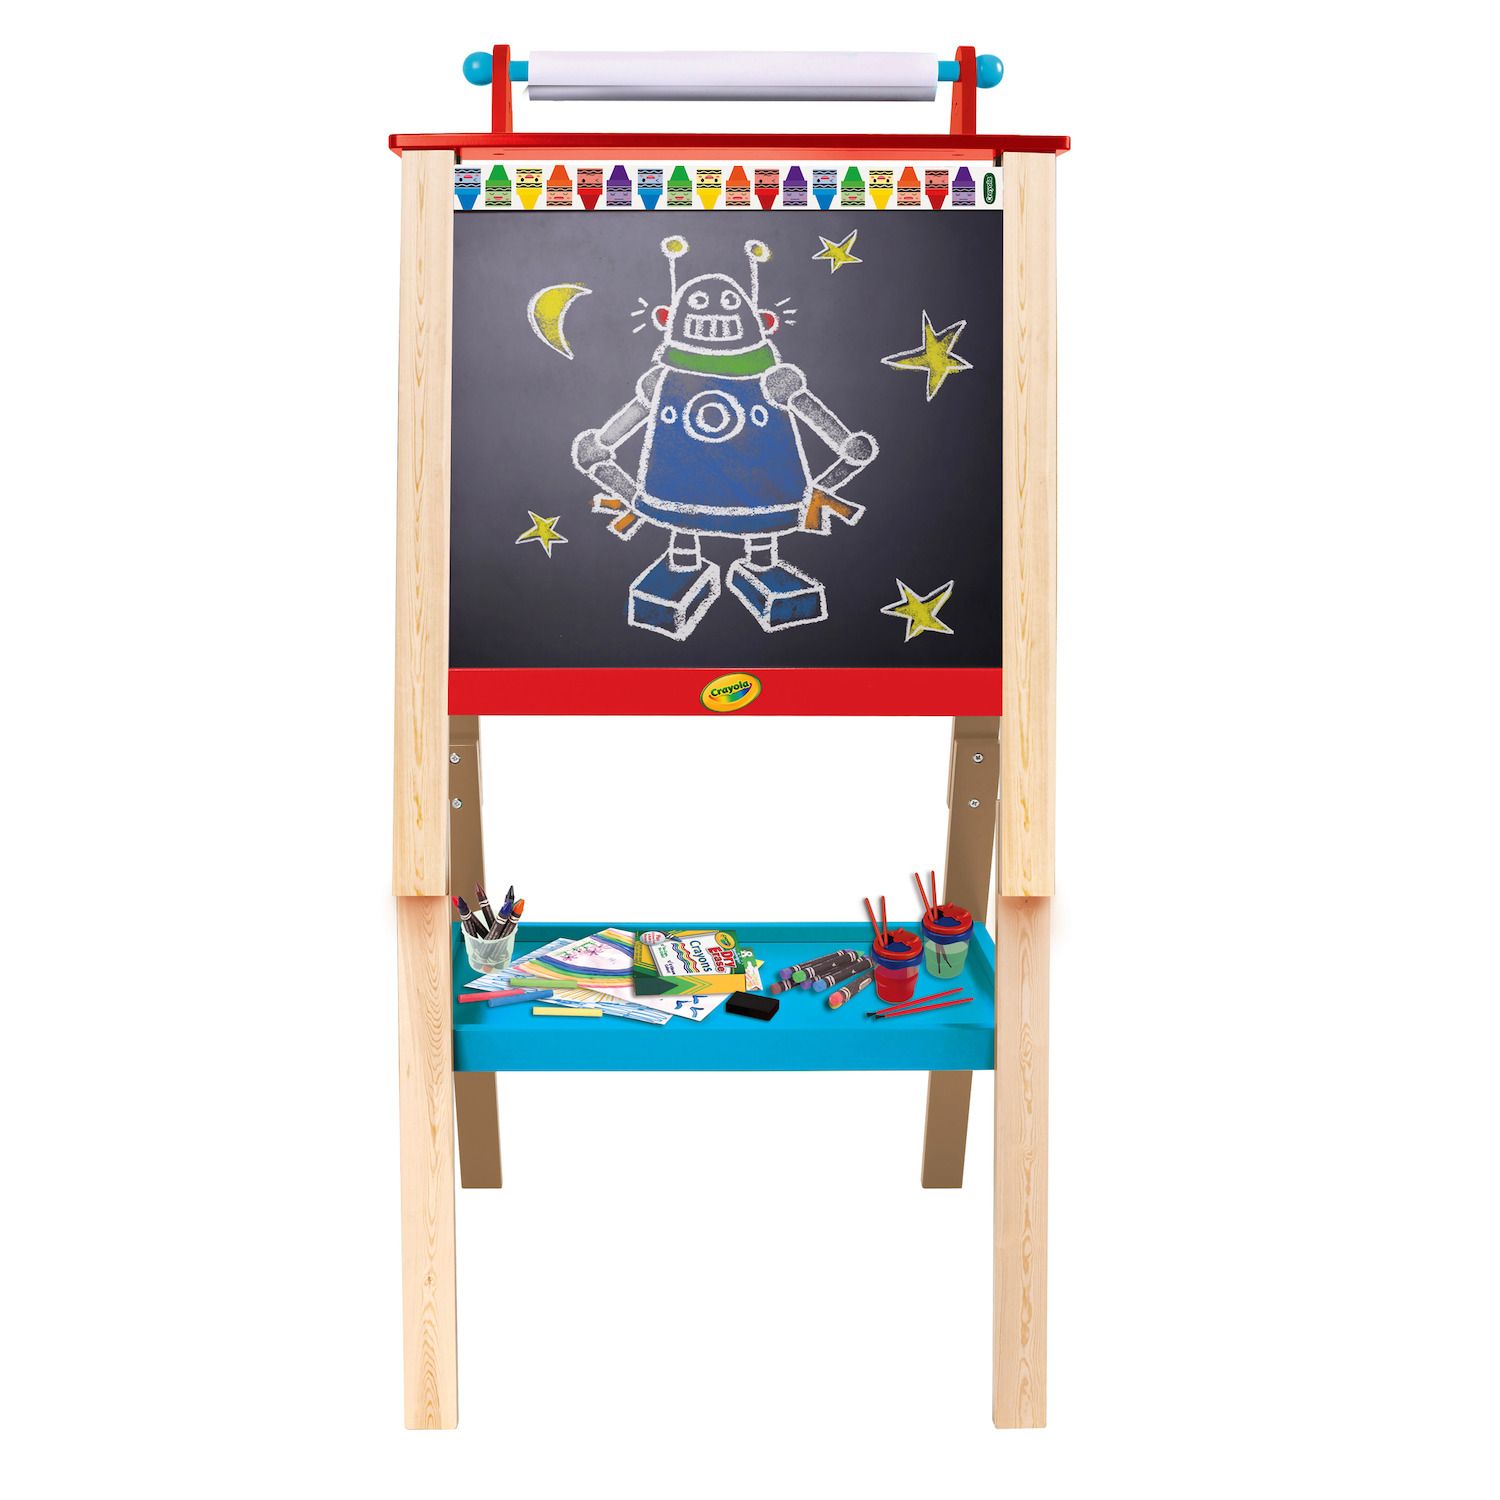 3-in-1 Wooden Art Easel for Kids with Drawing Paper Roll